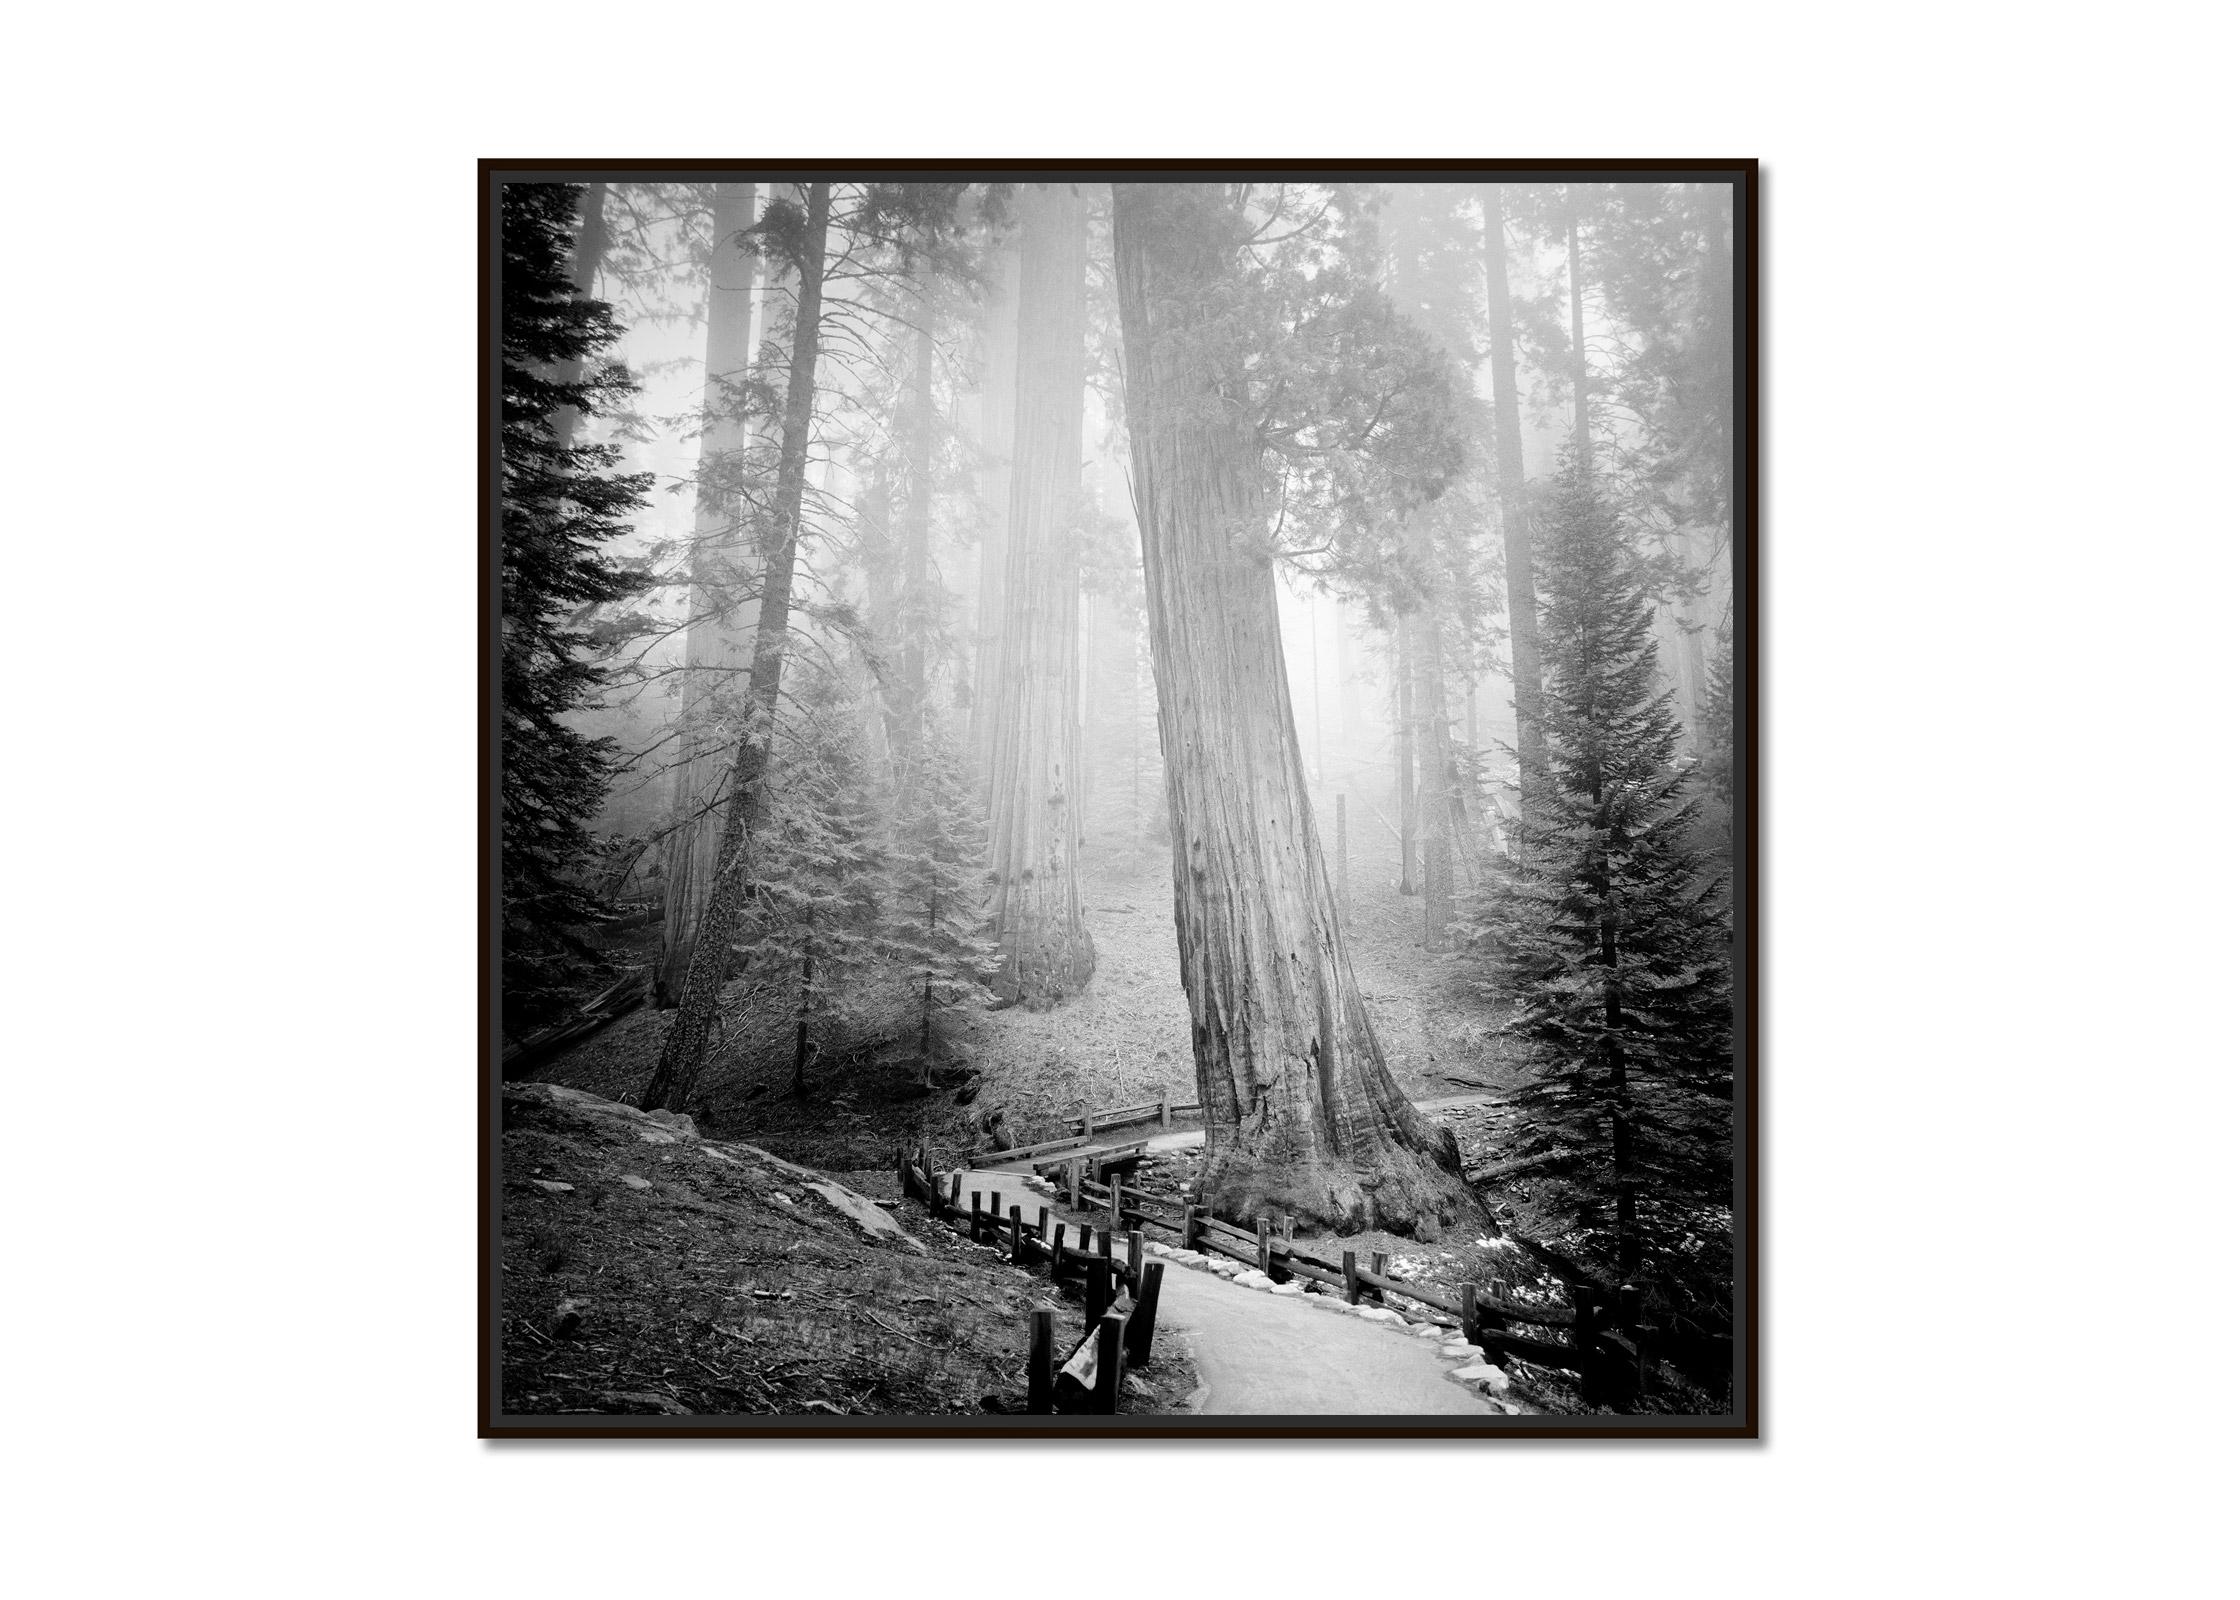 Redwood, Sequoia Nationalpark, USA, black and white photography, art, landscape - Photograph by Gerald Berghammer